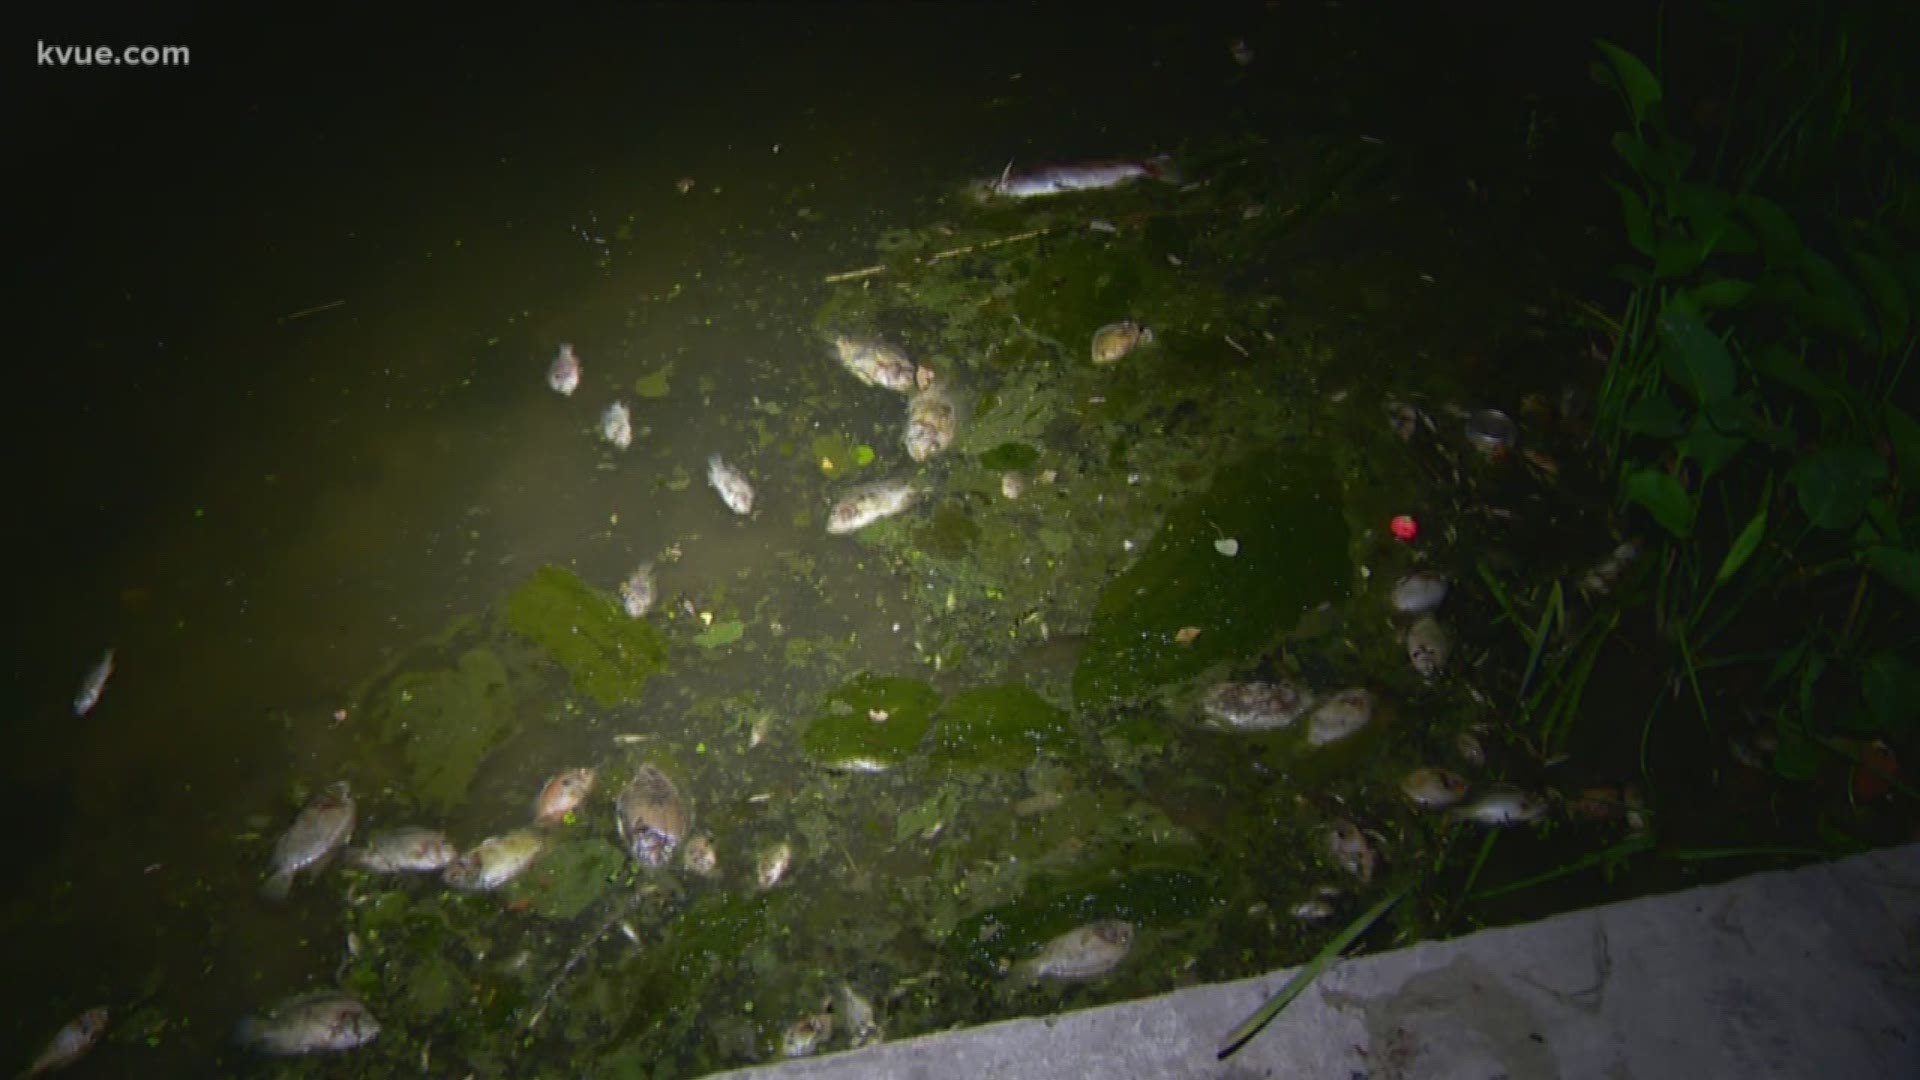 A wastewater spill killed several fish in Pflugerville's Gilleland Park.